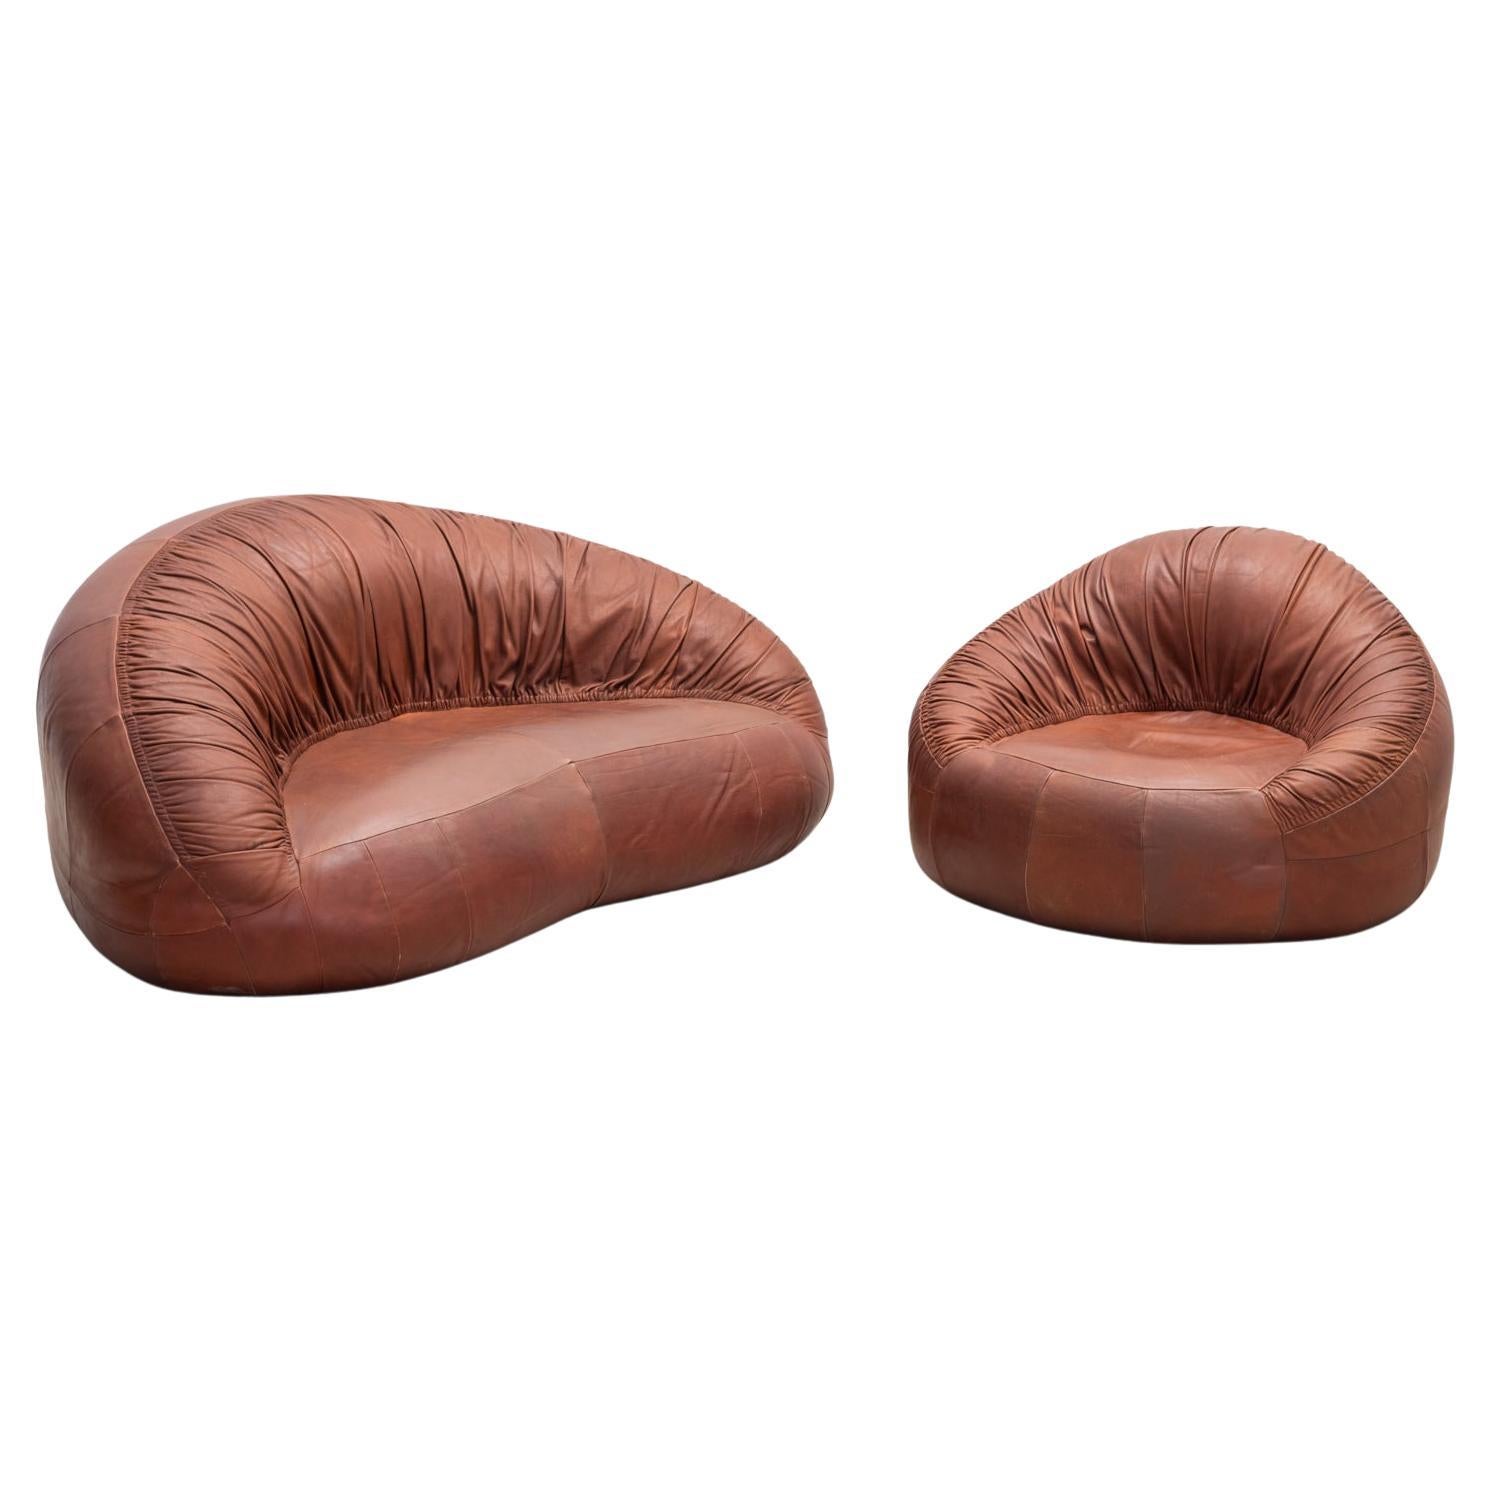 Pangolin Leather sofa and armchair by Egg Designs For Sale